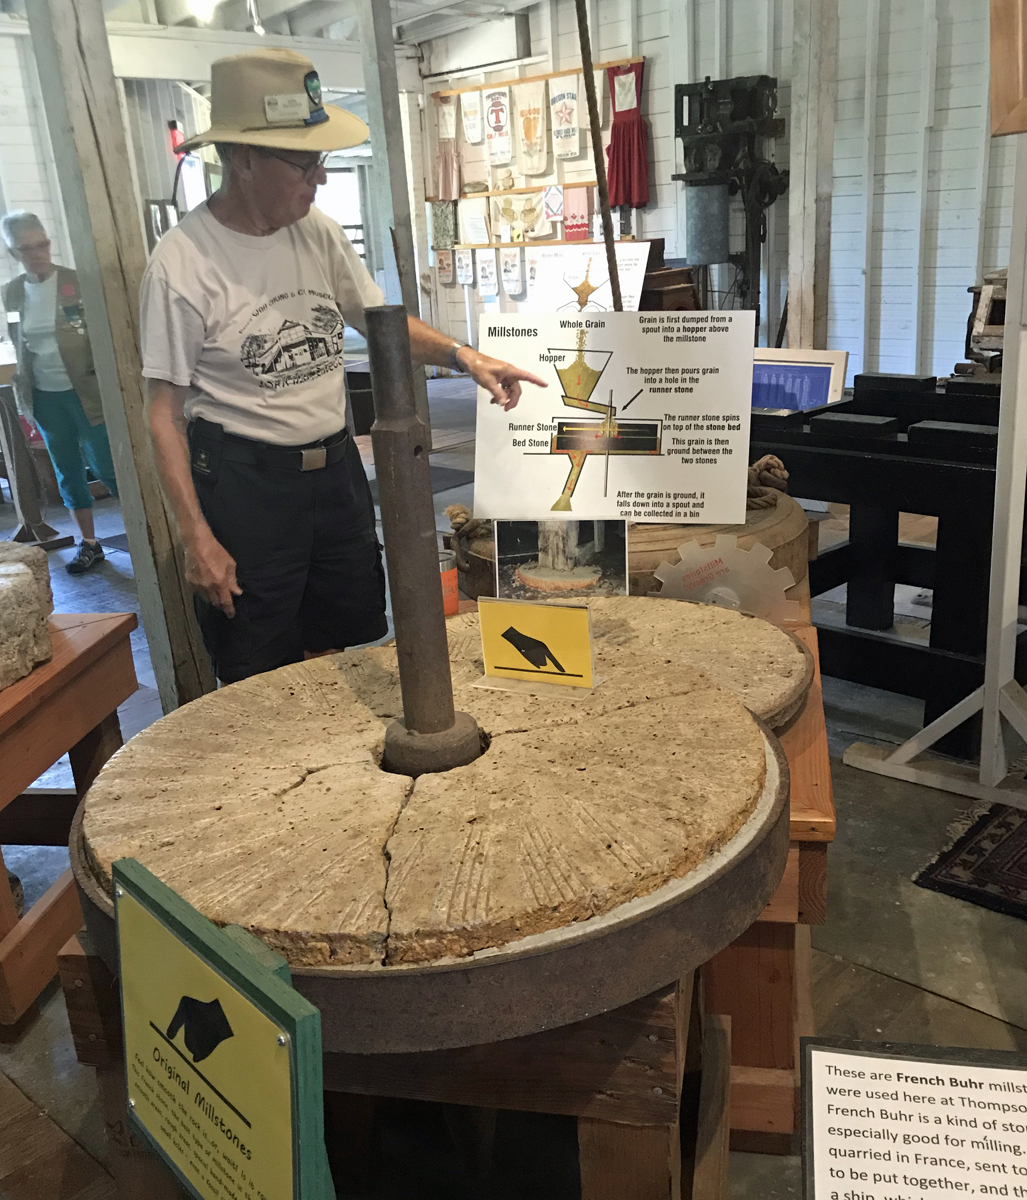 A docent explains the way mill stones were used.  The stones are 3 feet across and grooved for grinding the grain.